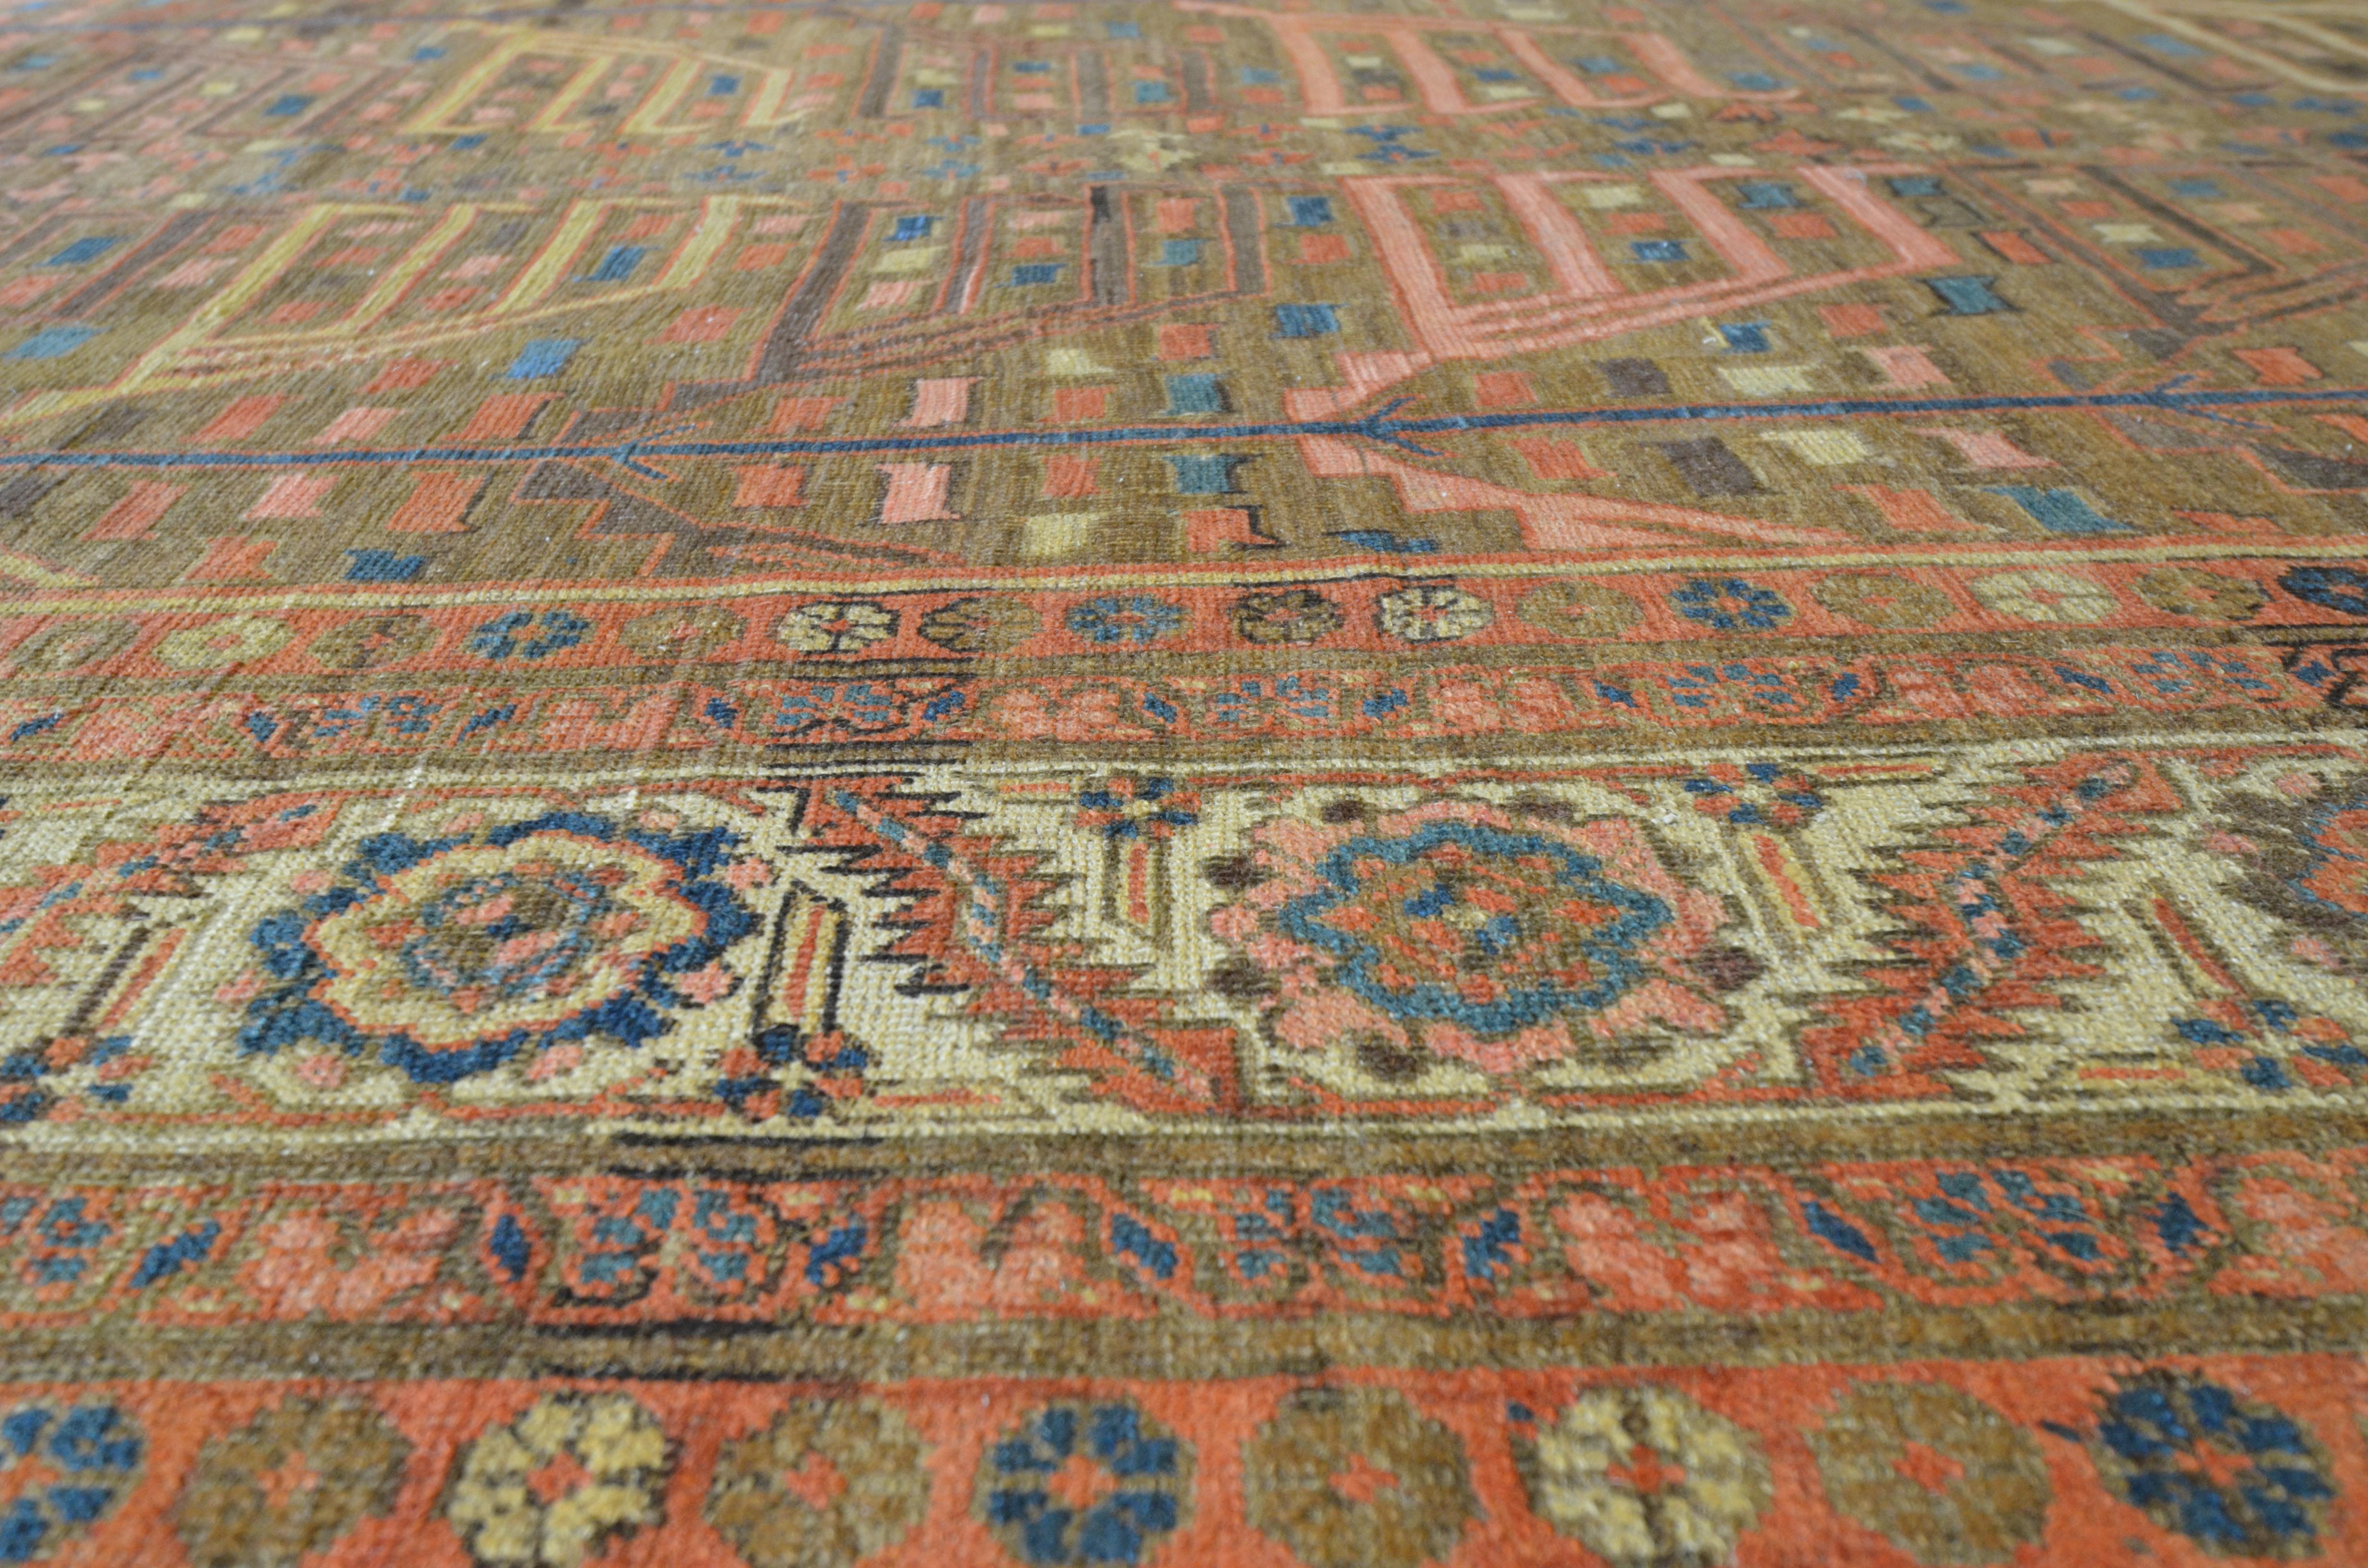 Late 19th Century Hand-Woven Bakhshaish Rug from North West Persia In Good Condition For Sale In West Hollywood, CA